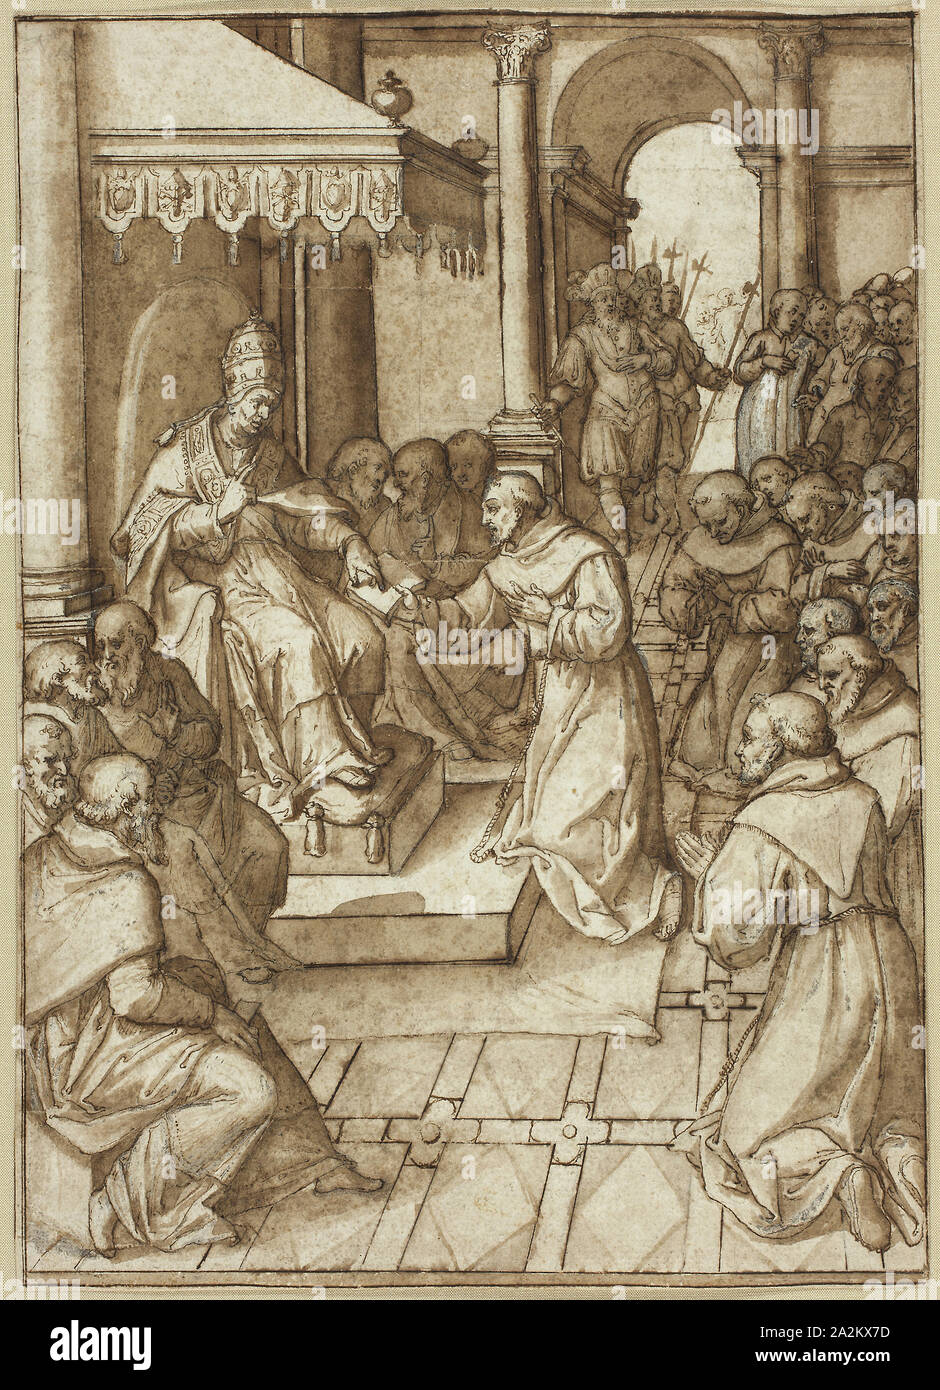 Approval of the Rules of the Franciscan Order by Pope Innocent III in 1209, n.d., Livio Agresti, Italian, 1508–1579, Italy, Pen and brown ink, with brush and brown wash, heightened with lead white gouache, over incising and black chalk, on cream laid paper, 288 x 203 mm (sight Stock Photo